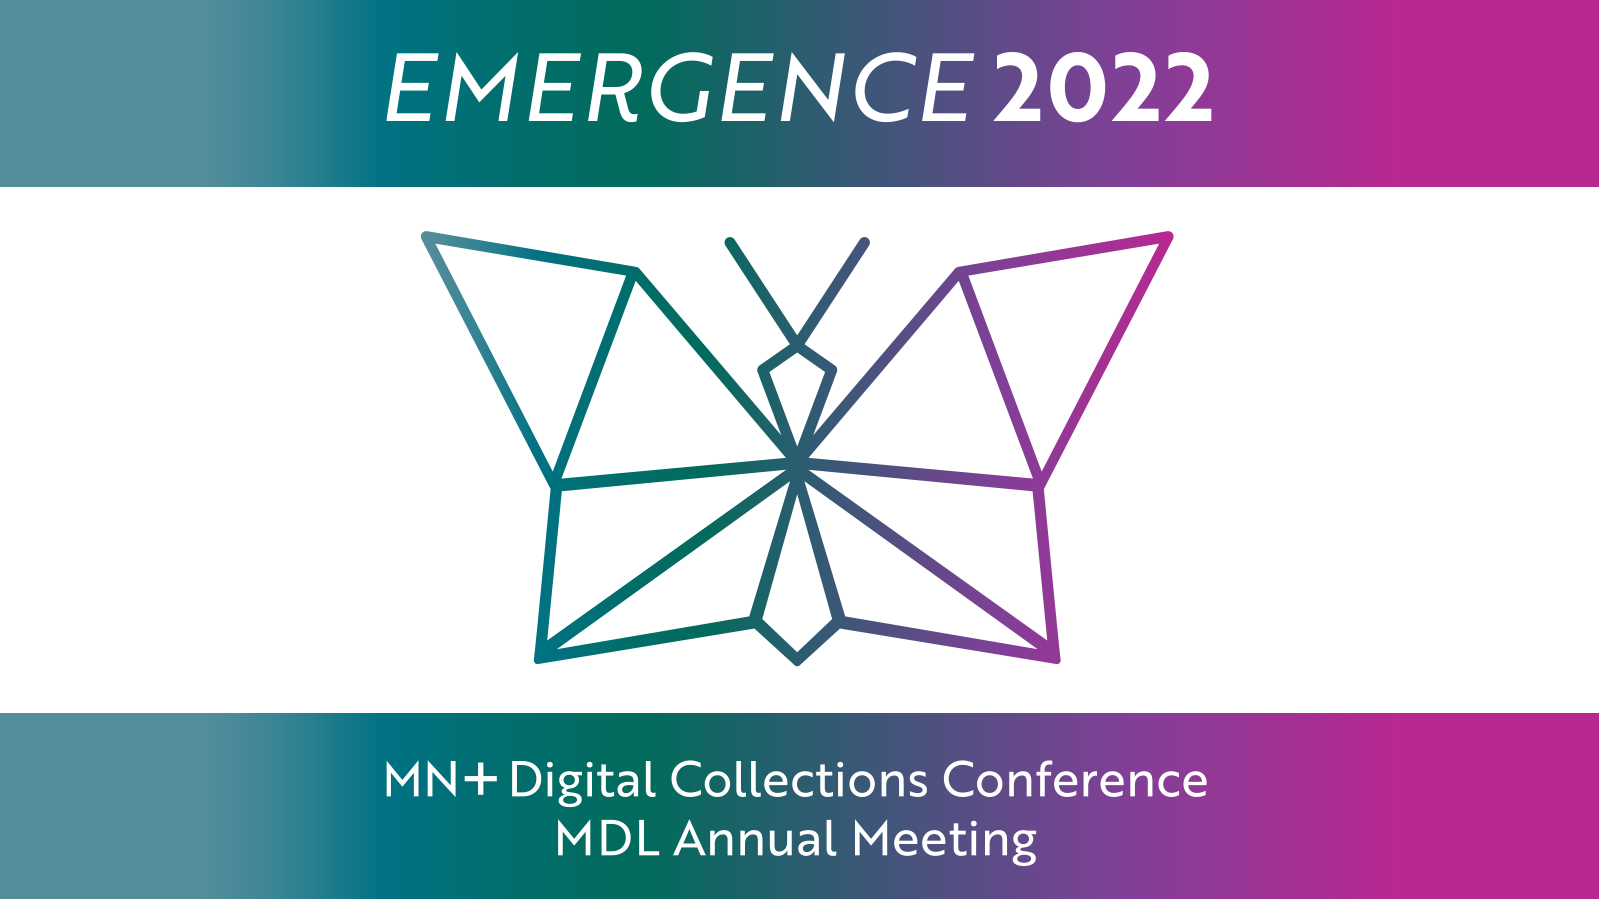 Emergence 2022, the theme for the MN+ Digital Collections Conference and MDL Annual Meeting, with a green, purple, and pink outline of a butterfly for the logo.